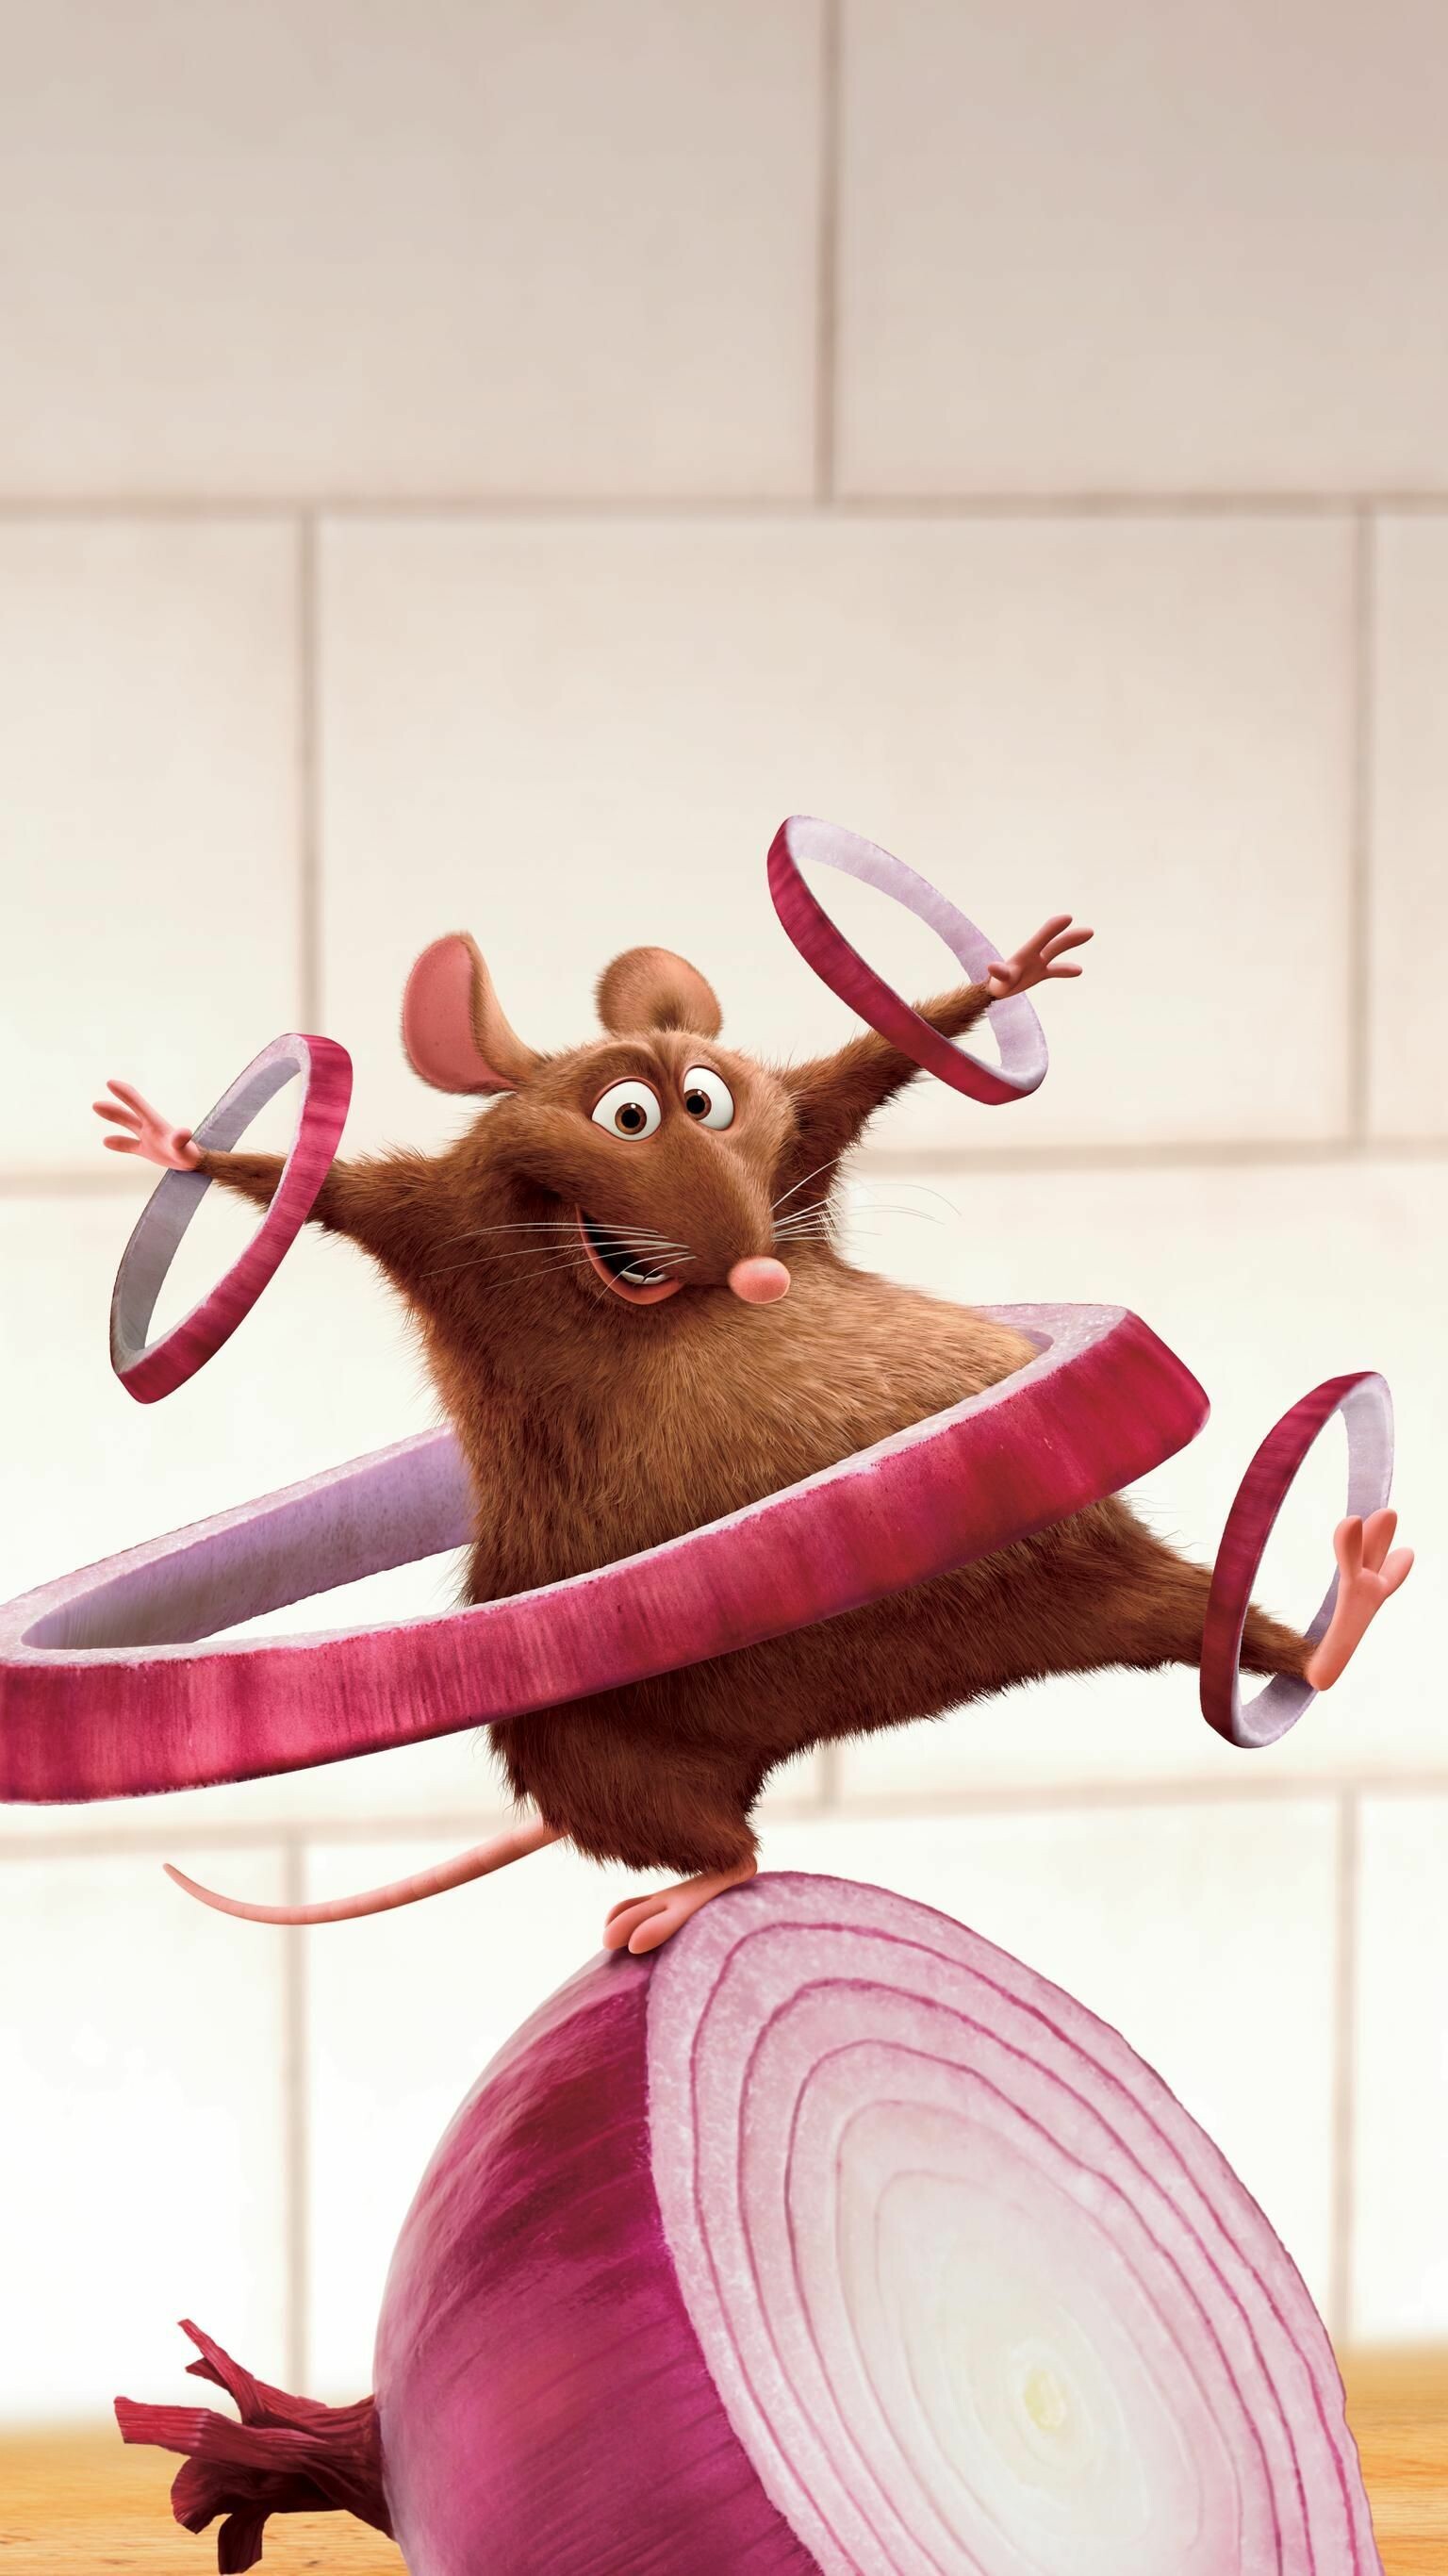 Ratatouille: The film stars the voices of Patton Oswalt as Remy, an anthropomorphic rat who is interested in cooking. 1540x2740 HD Wallpaper.